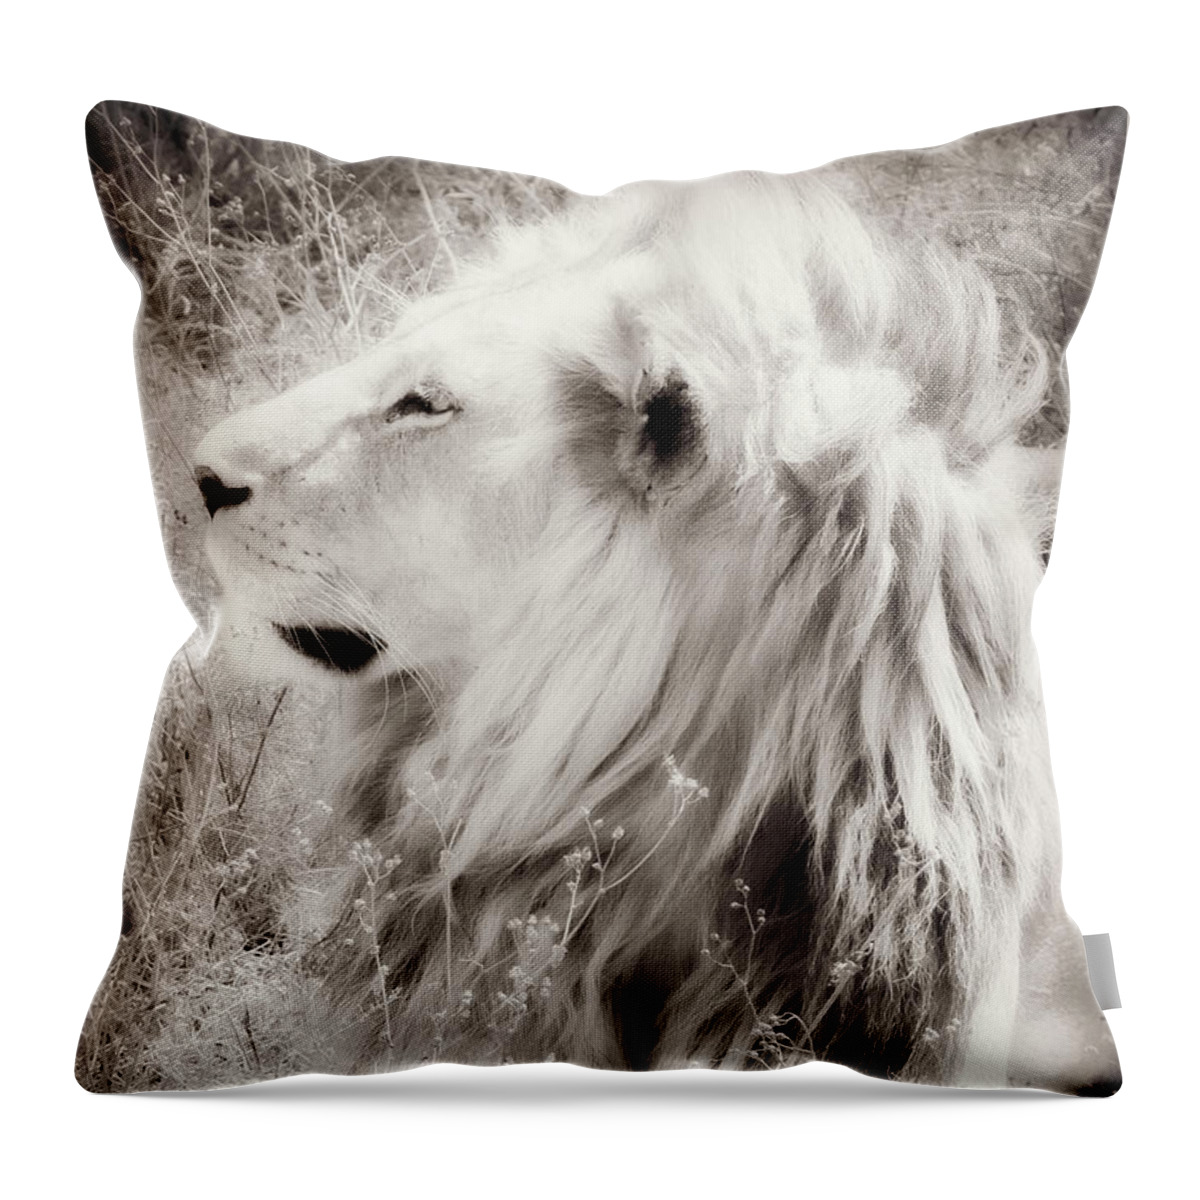 White Lion Throw Pillow featuring the photograph White Lion by Chris Scroggins